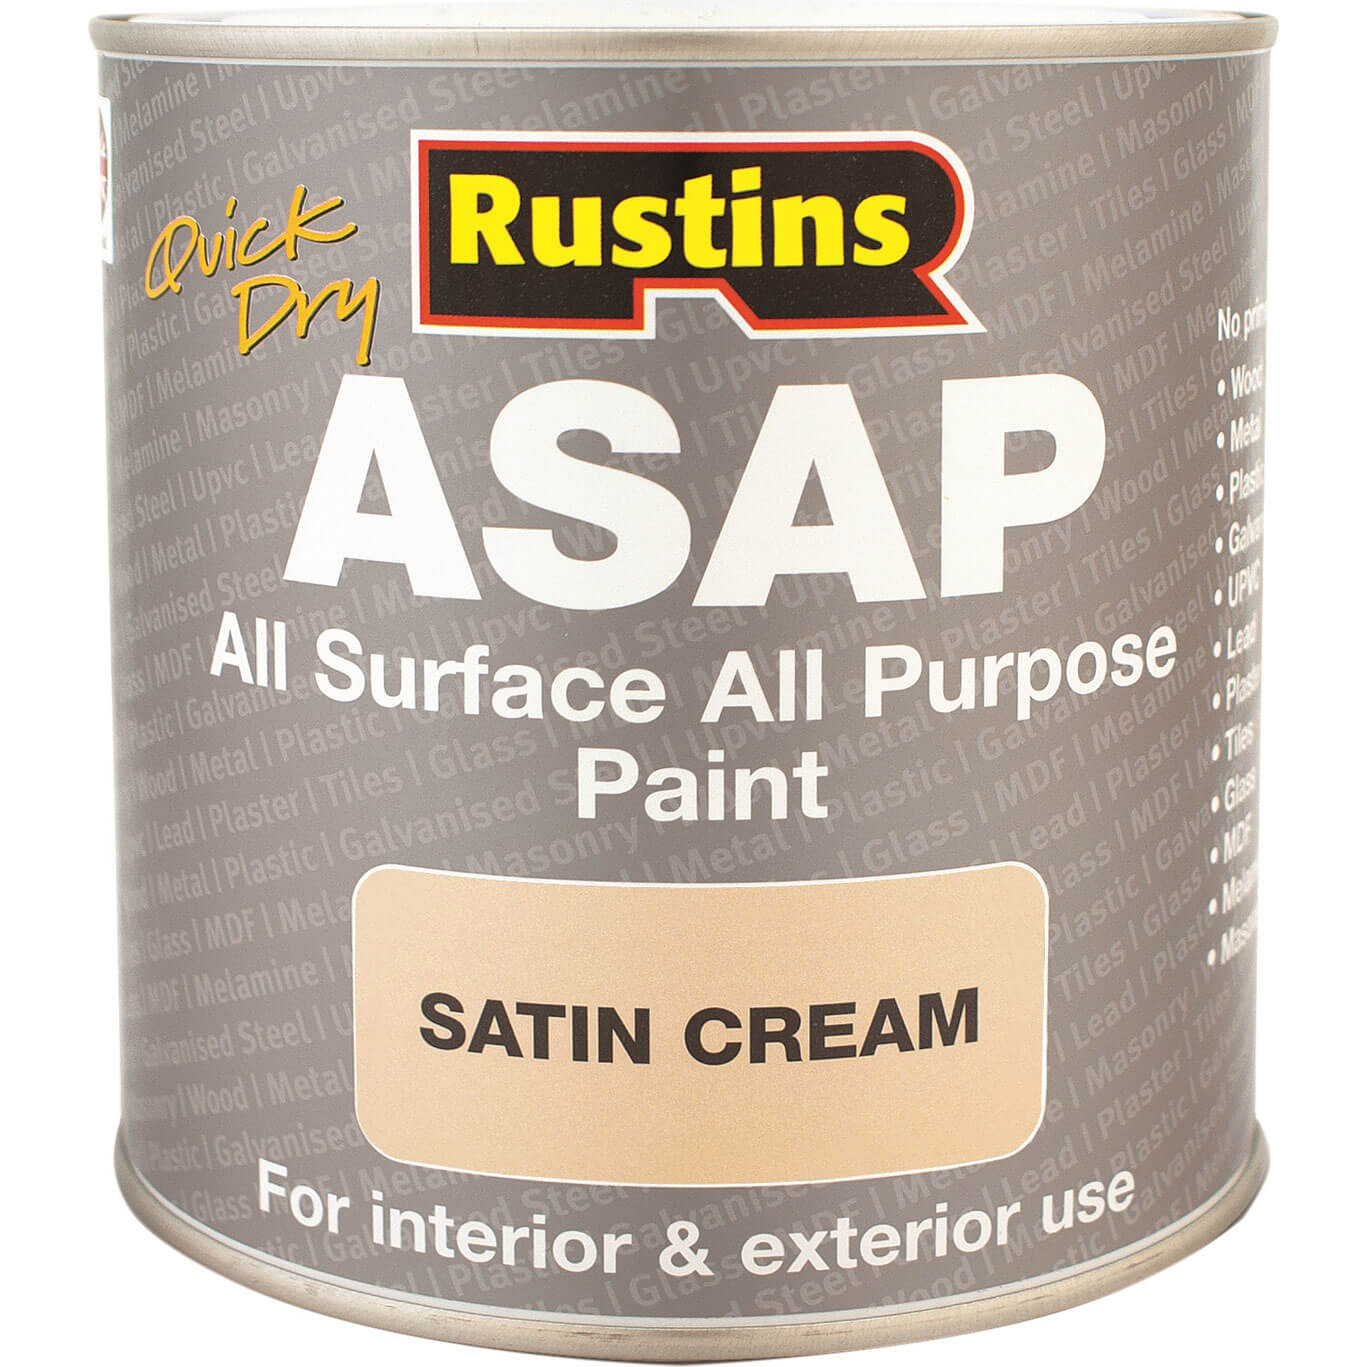 Image of Rustins ASAP All Surface All Purpose Paint Cream 500ml